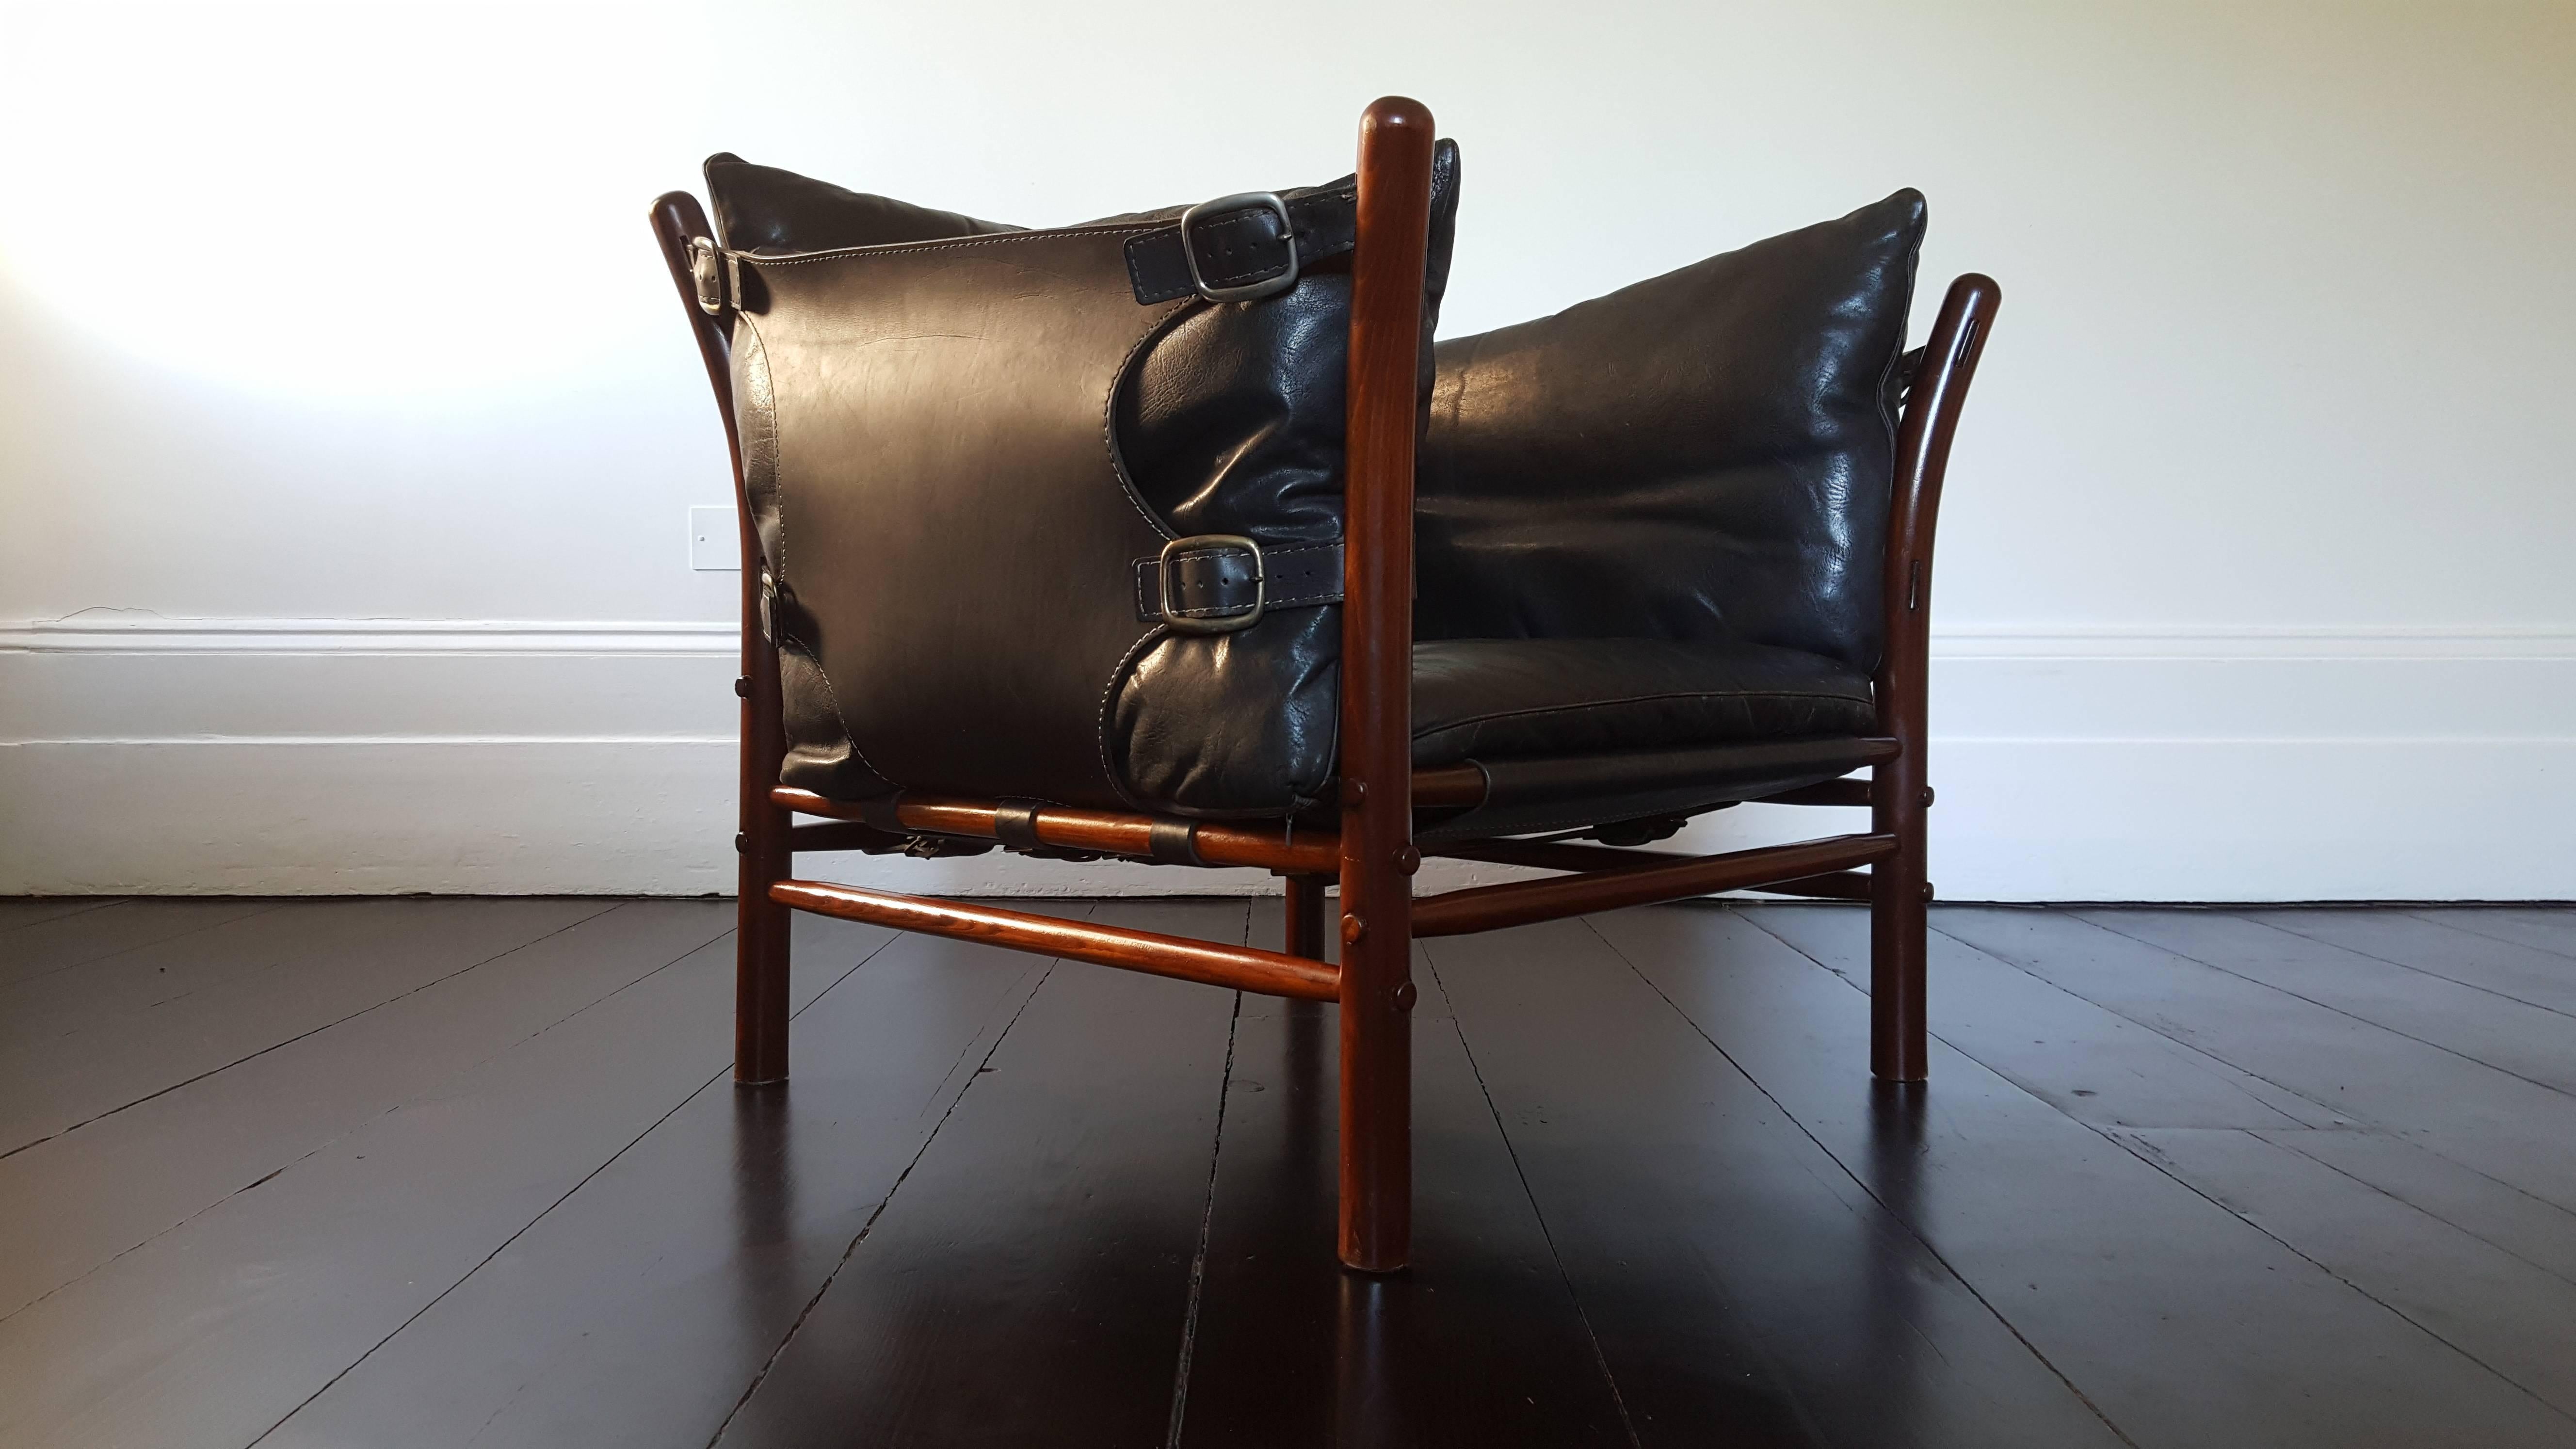 A 1960s 'Ilona' chair by Swedish designer Arne Norell.
 
Featuring jacaranda-stained beech, brass buckles and saddle leather.
 
Great design, amazingly comfortable.

We provide very competitive global shipping rates per your requirements - please